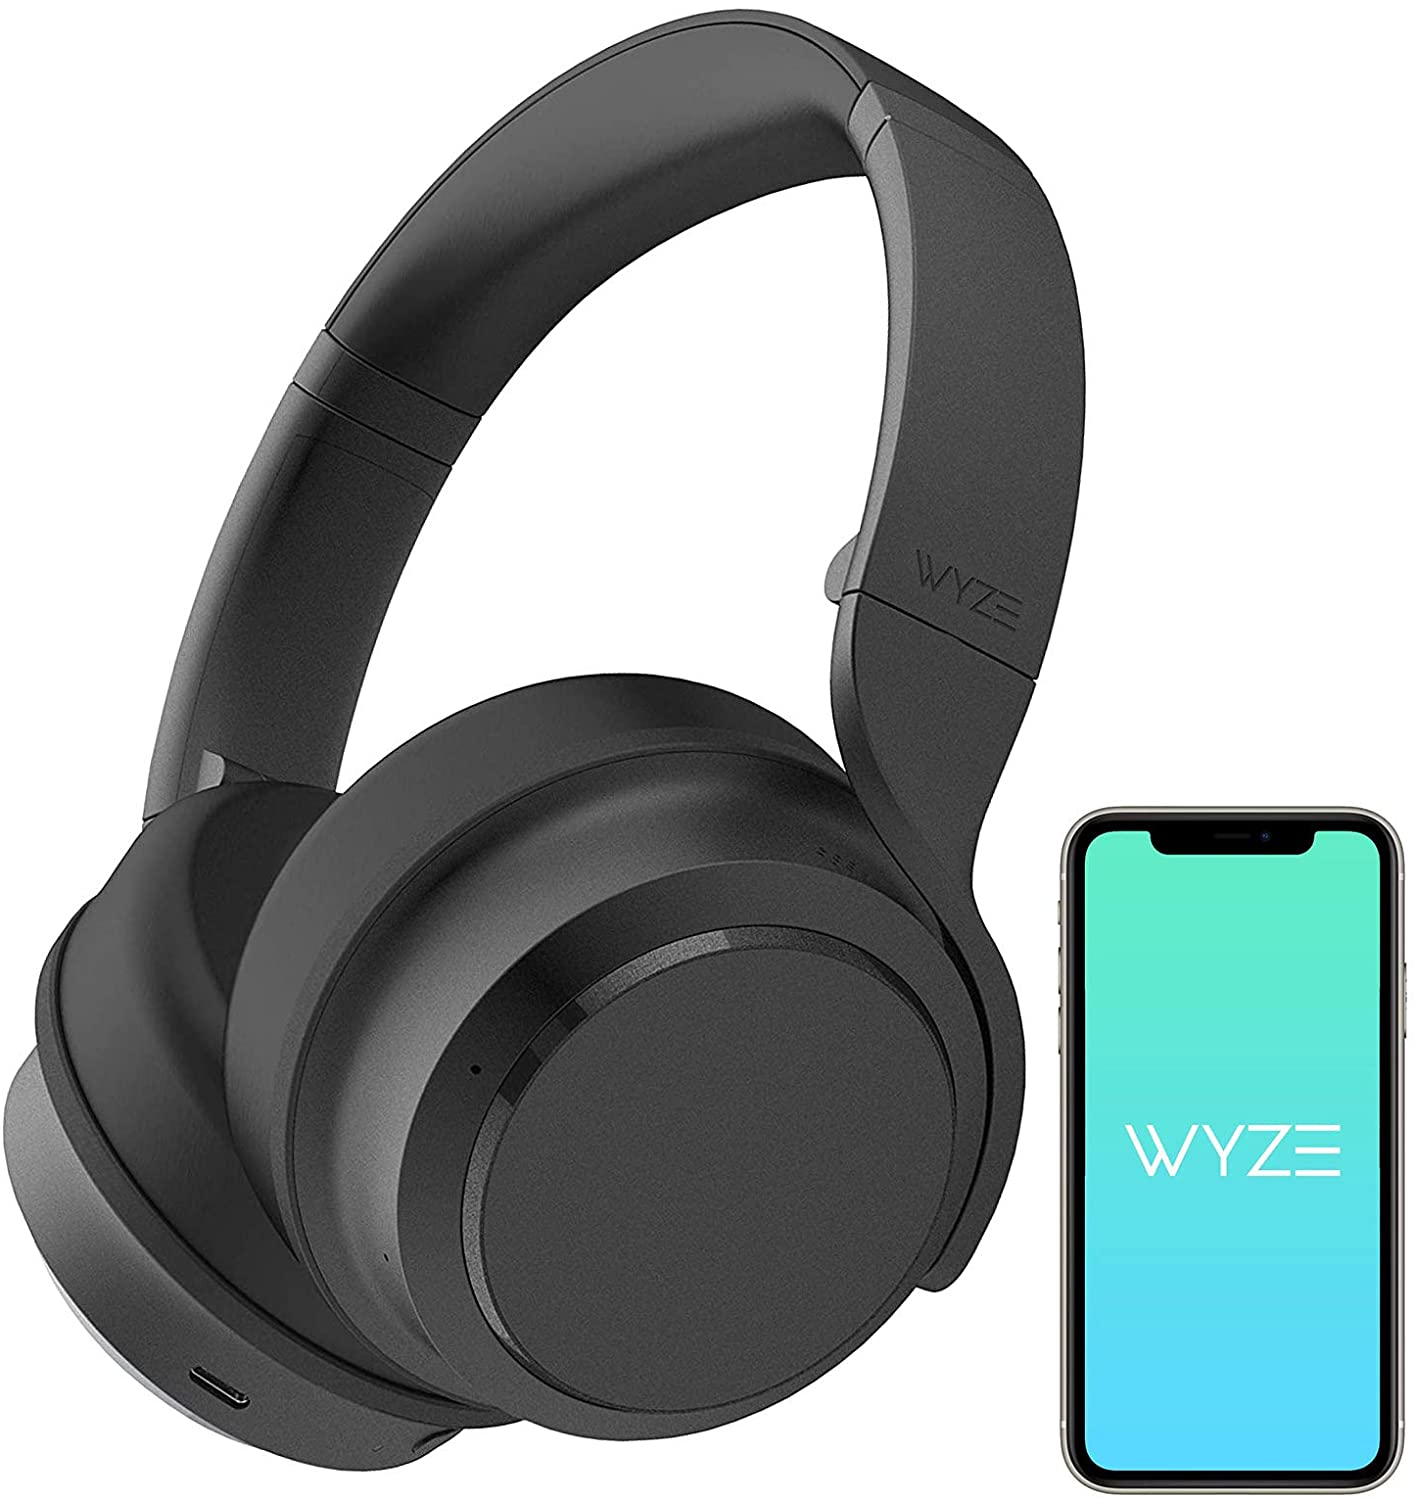 Wyze Bluetooth 5.0 ANC Over the Ear Headphones w/ Alexa Built-In (Black or White) $40 + Free S/H w/ Amazon Prime